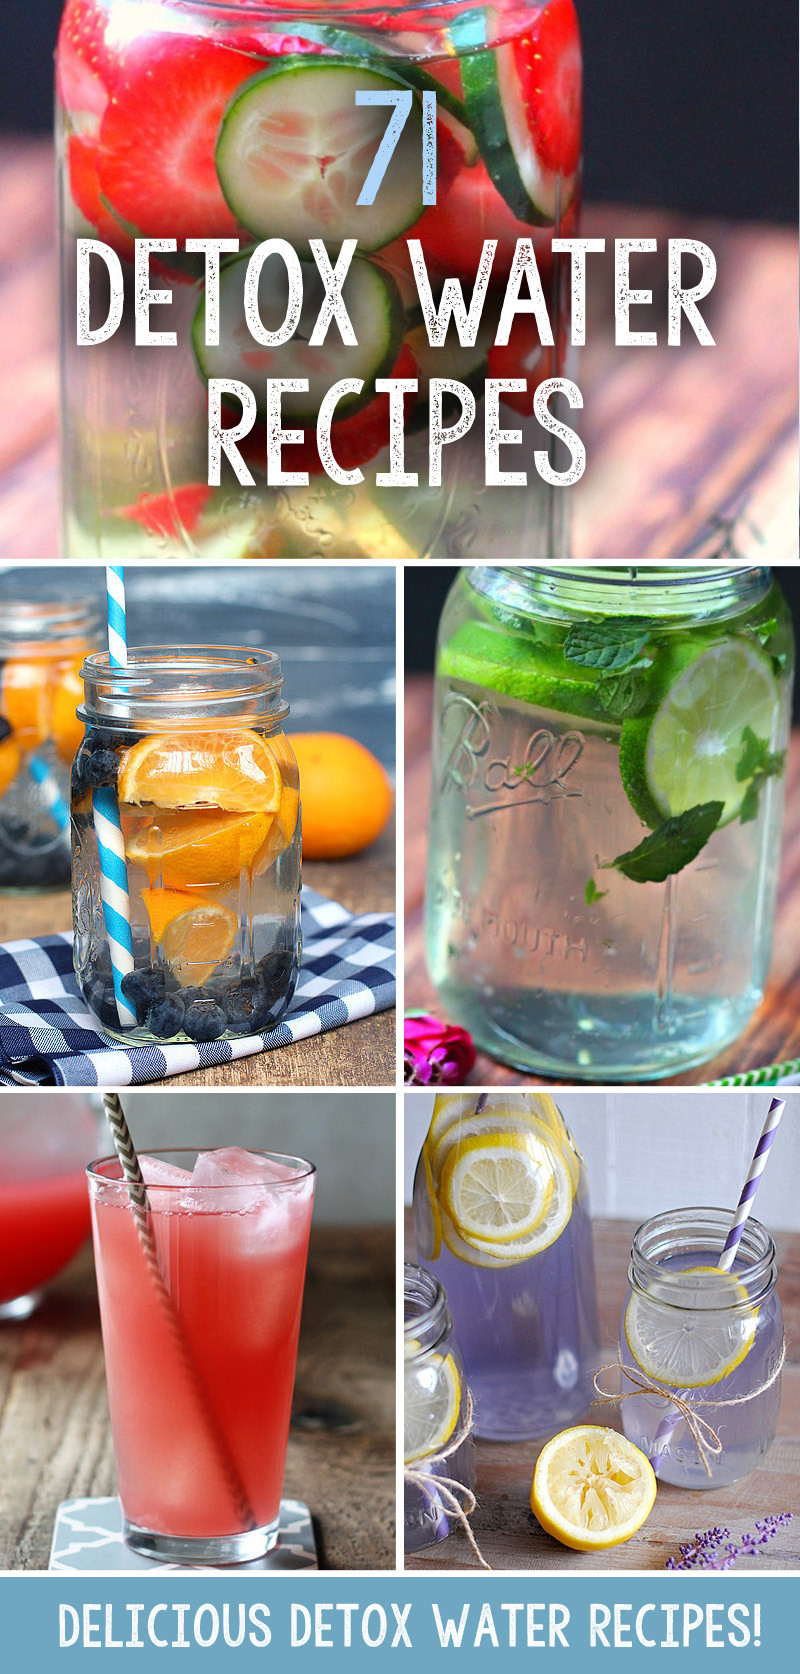 Weight Loss Detox Drink Recipes
 71 Delicious Detox Water Recipes To Help You Lose Weight Fast